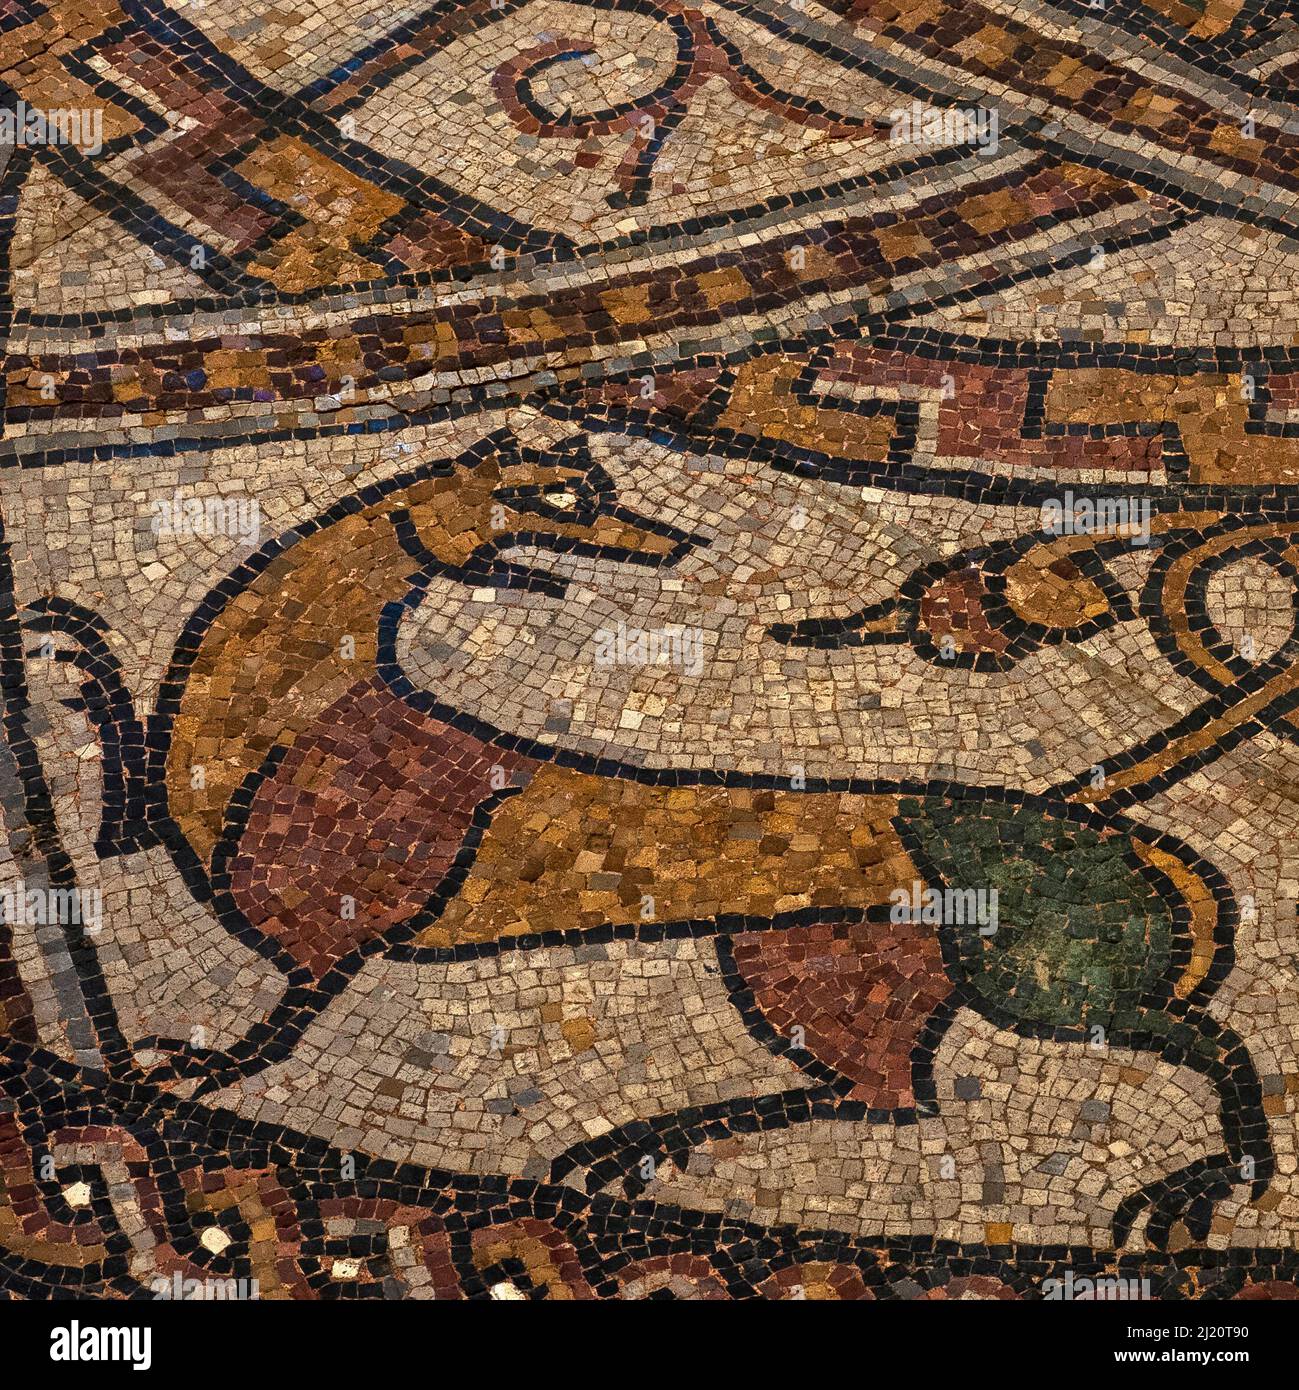 Colourful cat.  Detail of medieval mosaic in restored late-1000s or early 1100s pavement in former Benedictine abbey church at Sorde l'Abbaye, Landes, Nouvelle-Aquitaine, France. Stock Photo